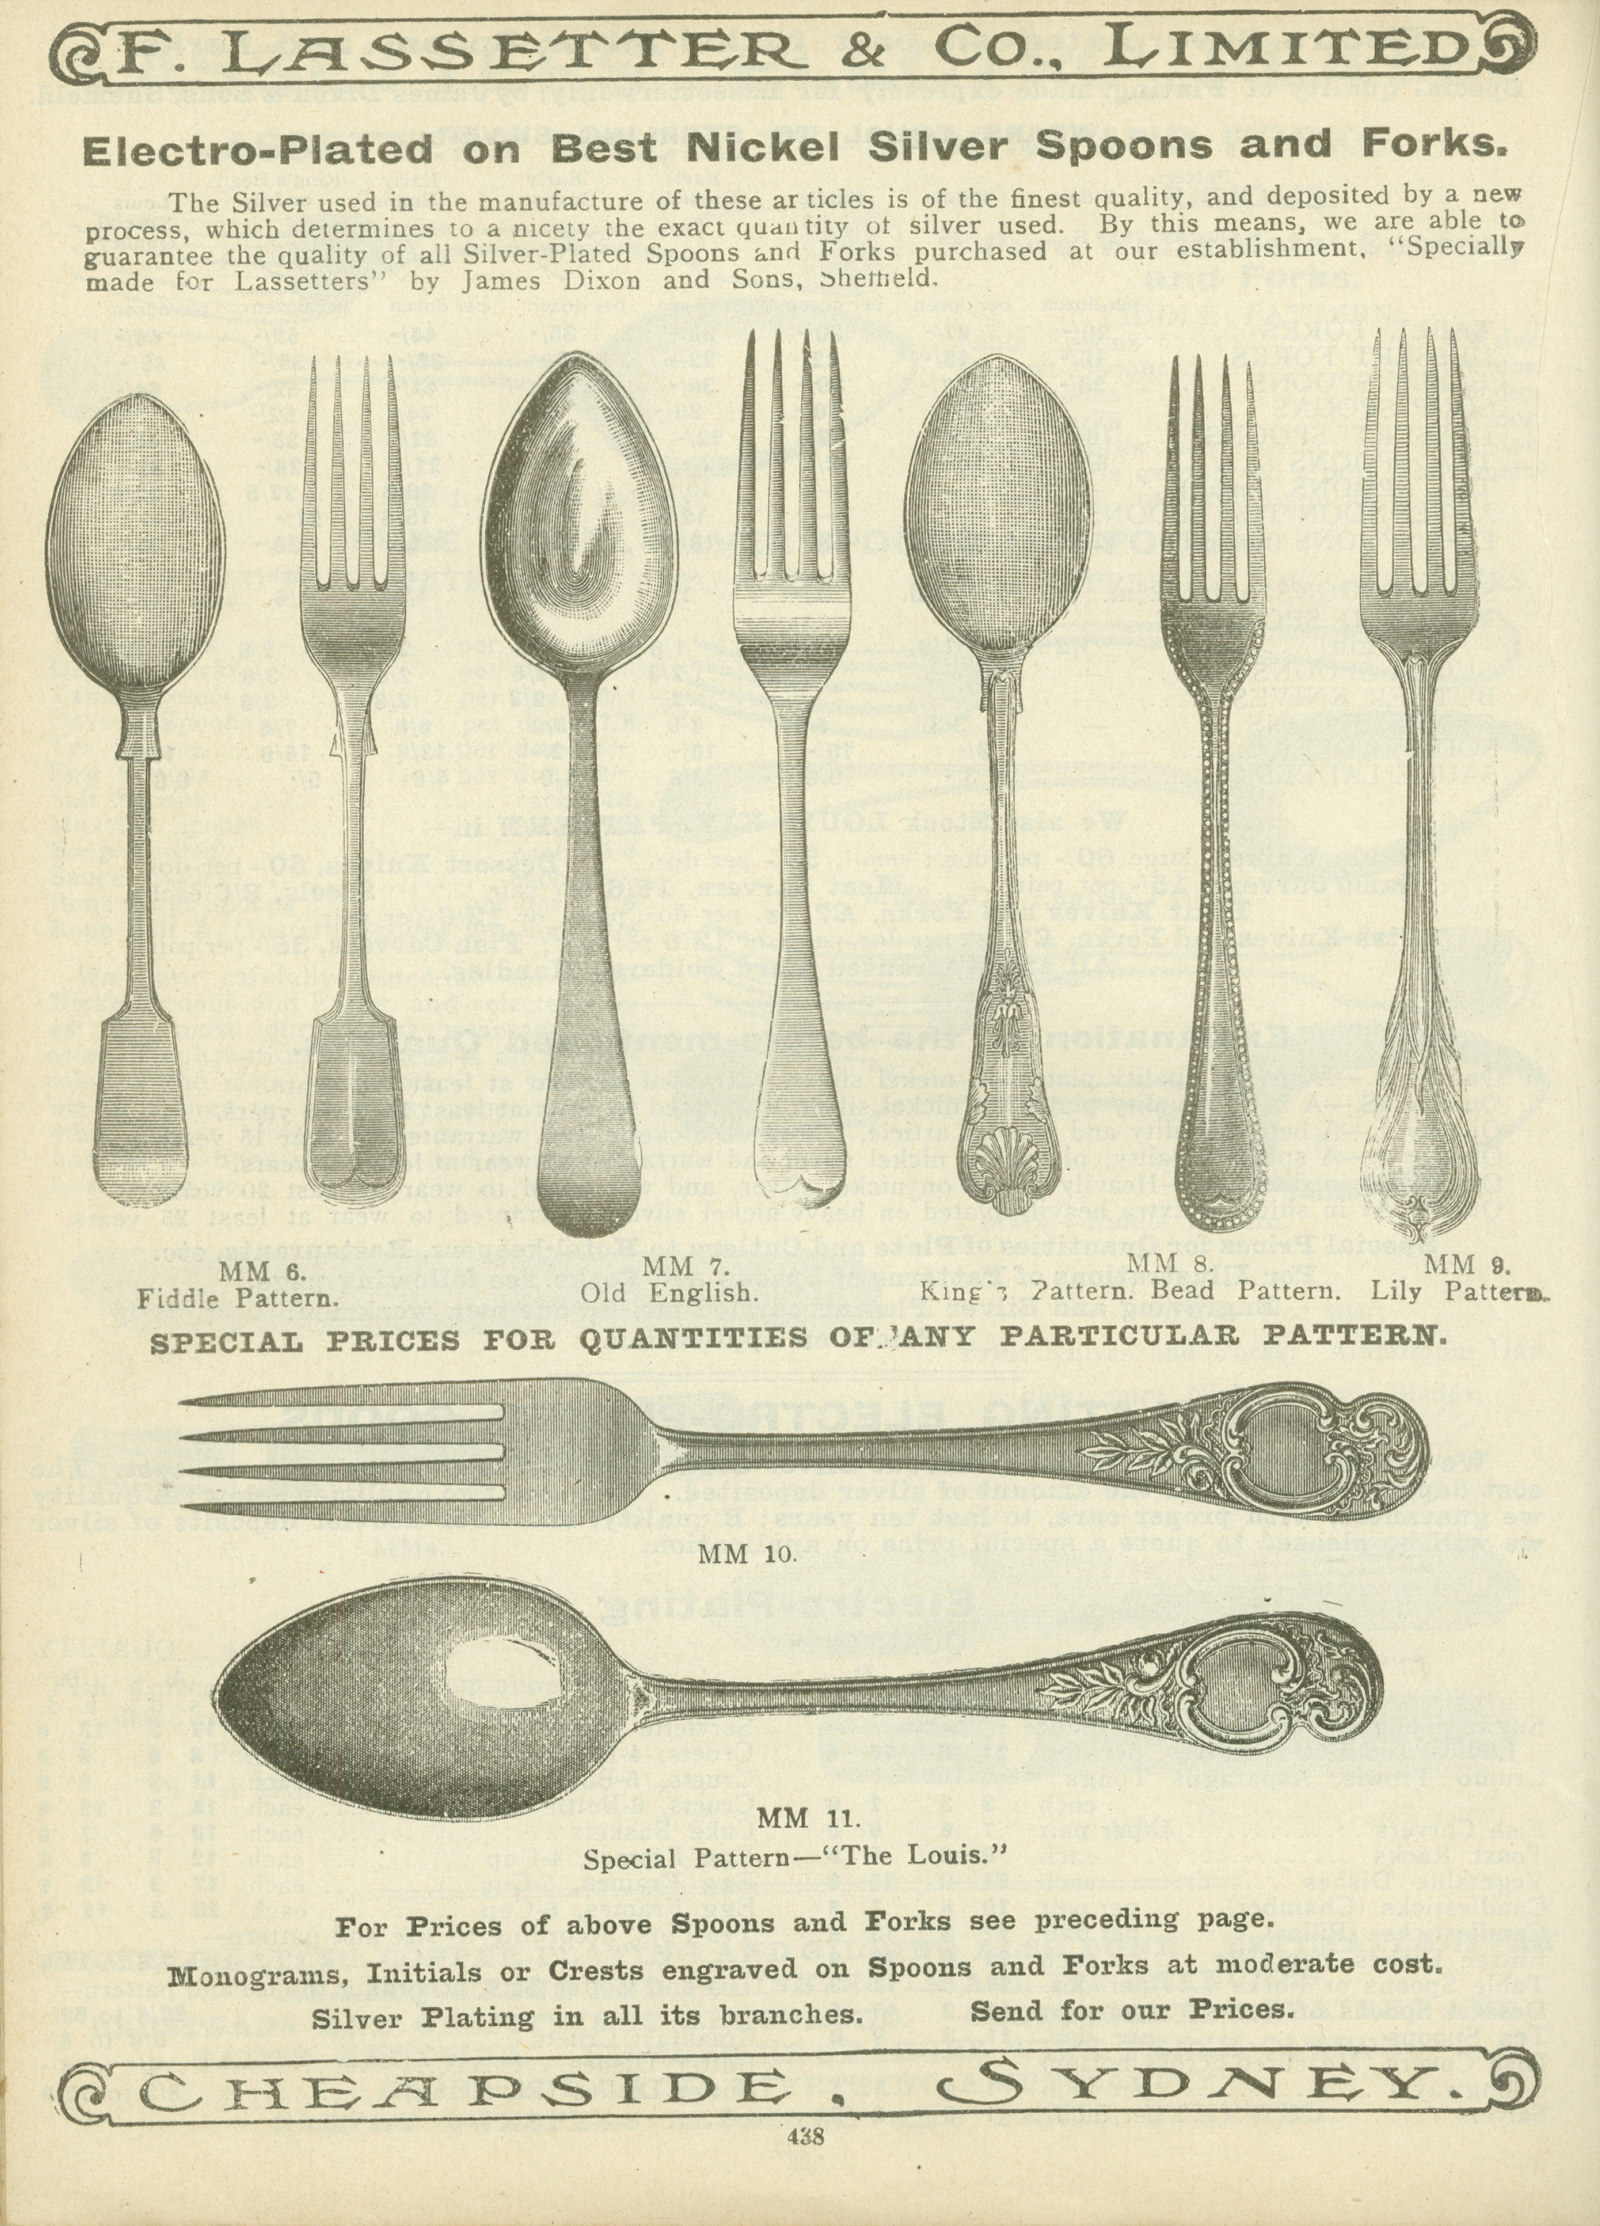 Page from catalogue, with illustrations of spoons and forks.